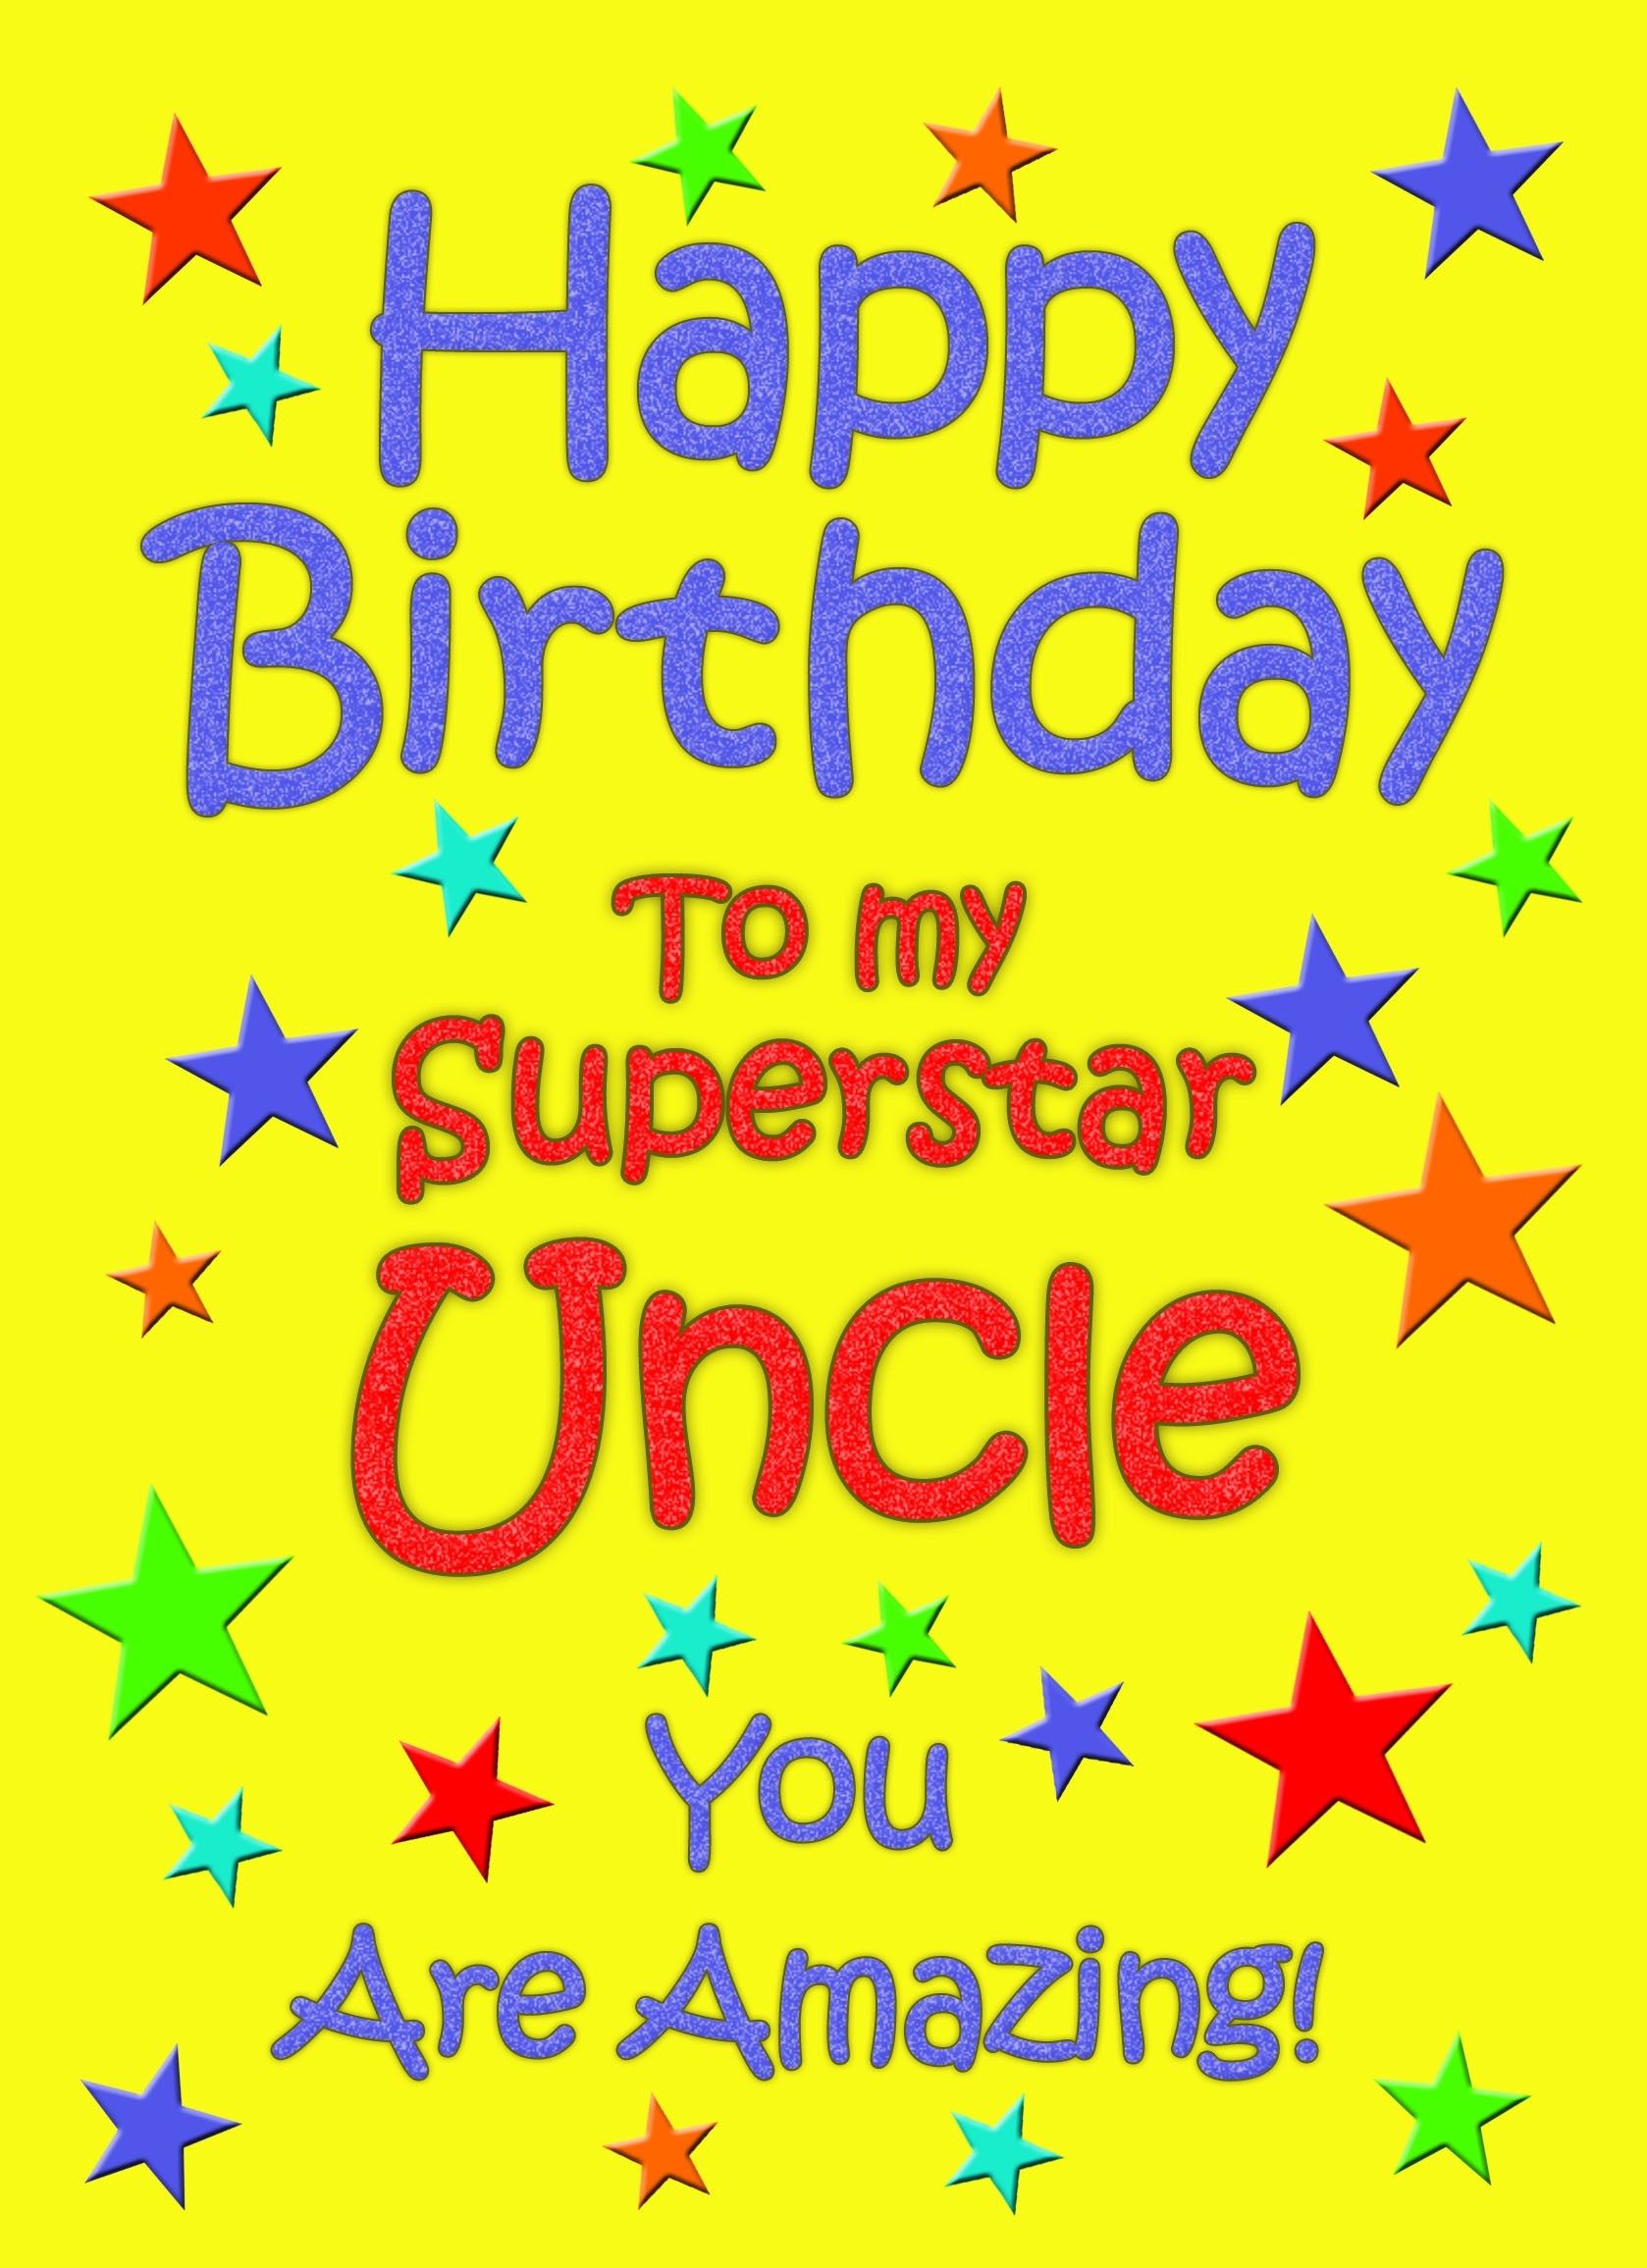 Uncle Birthday Card (Yellow)